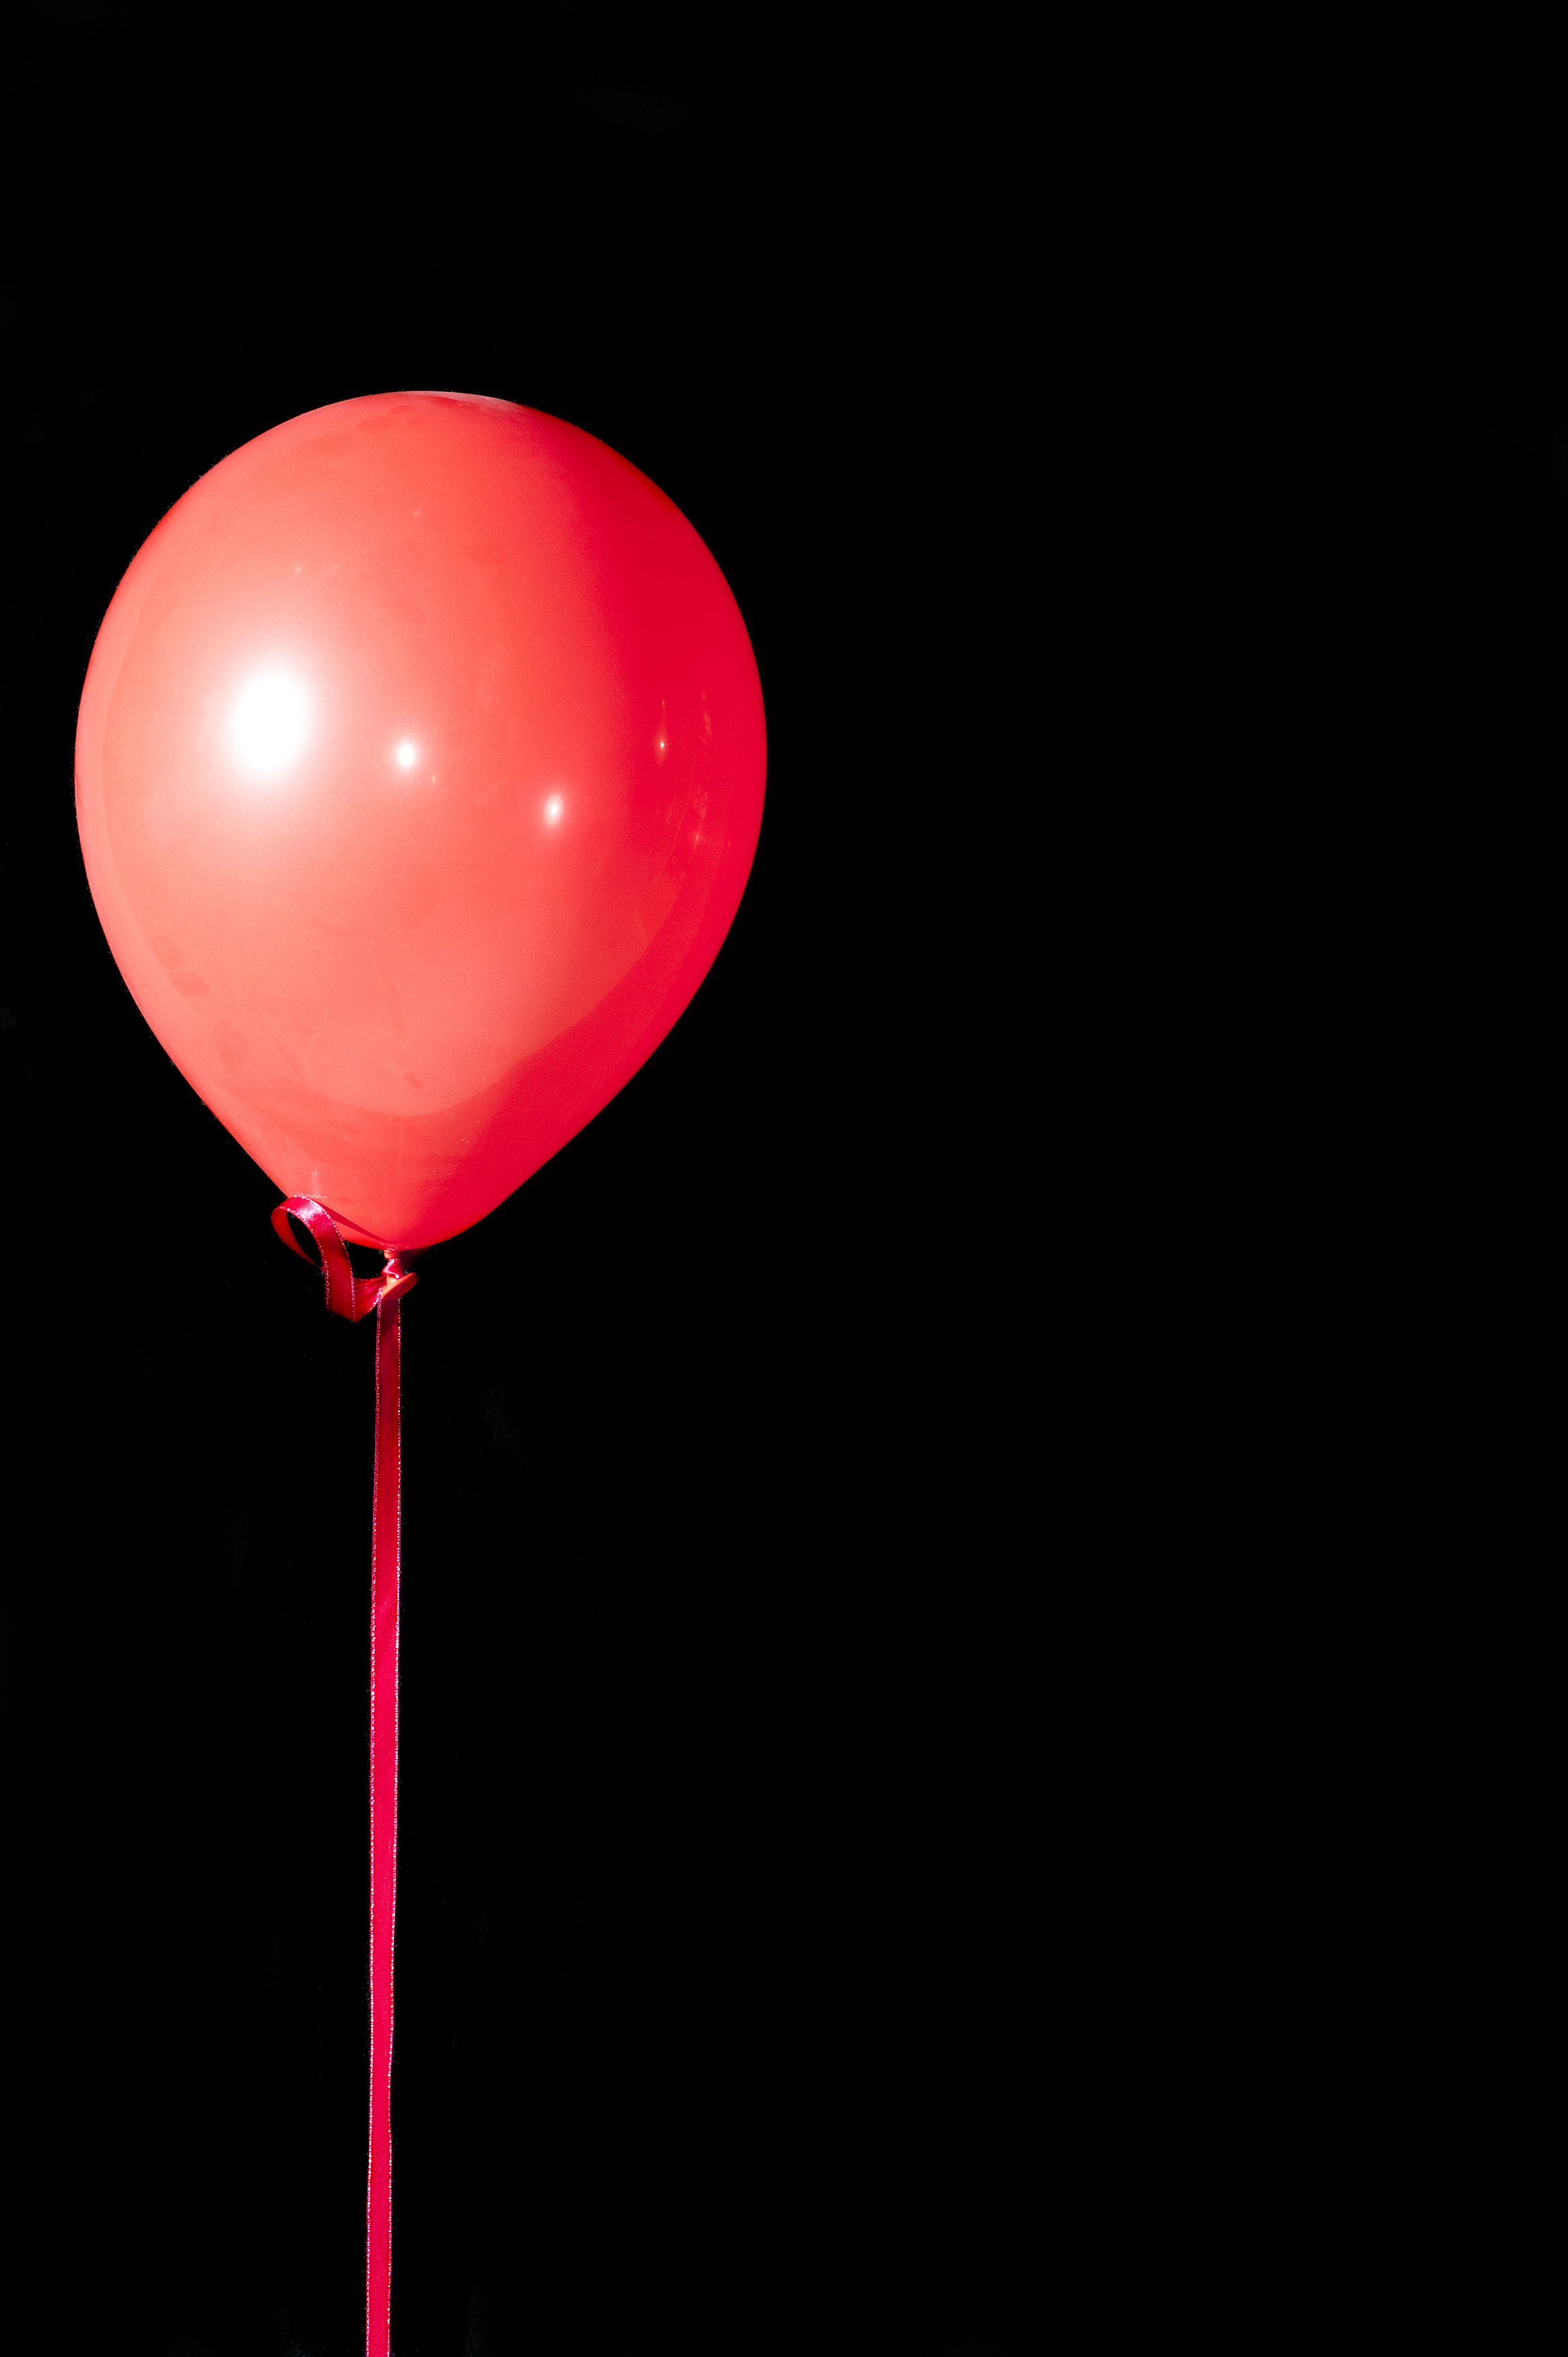 red balloon-2741 | Stockarch